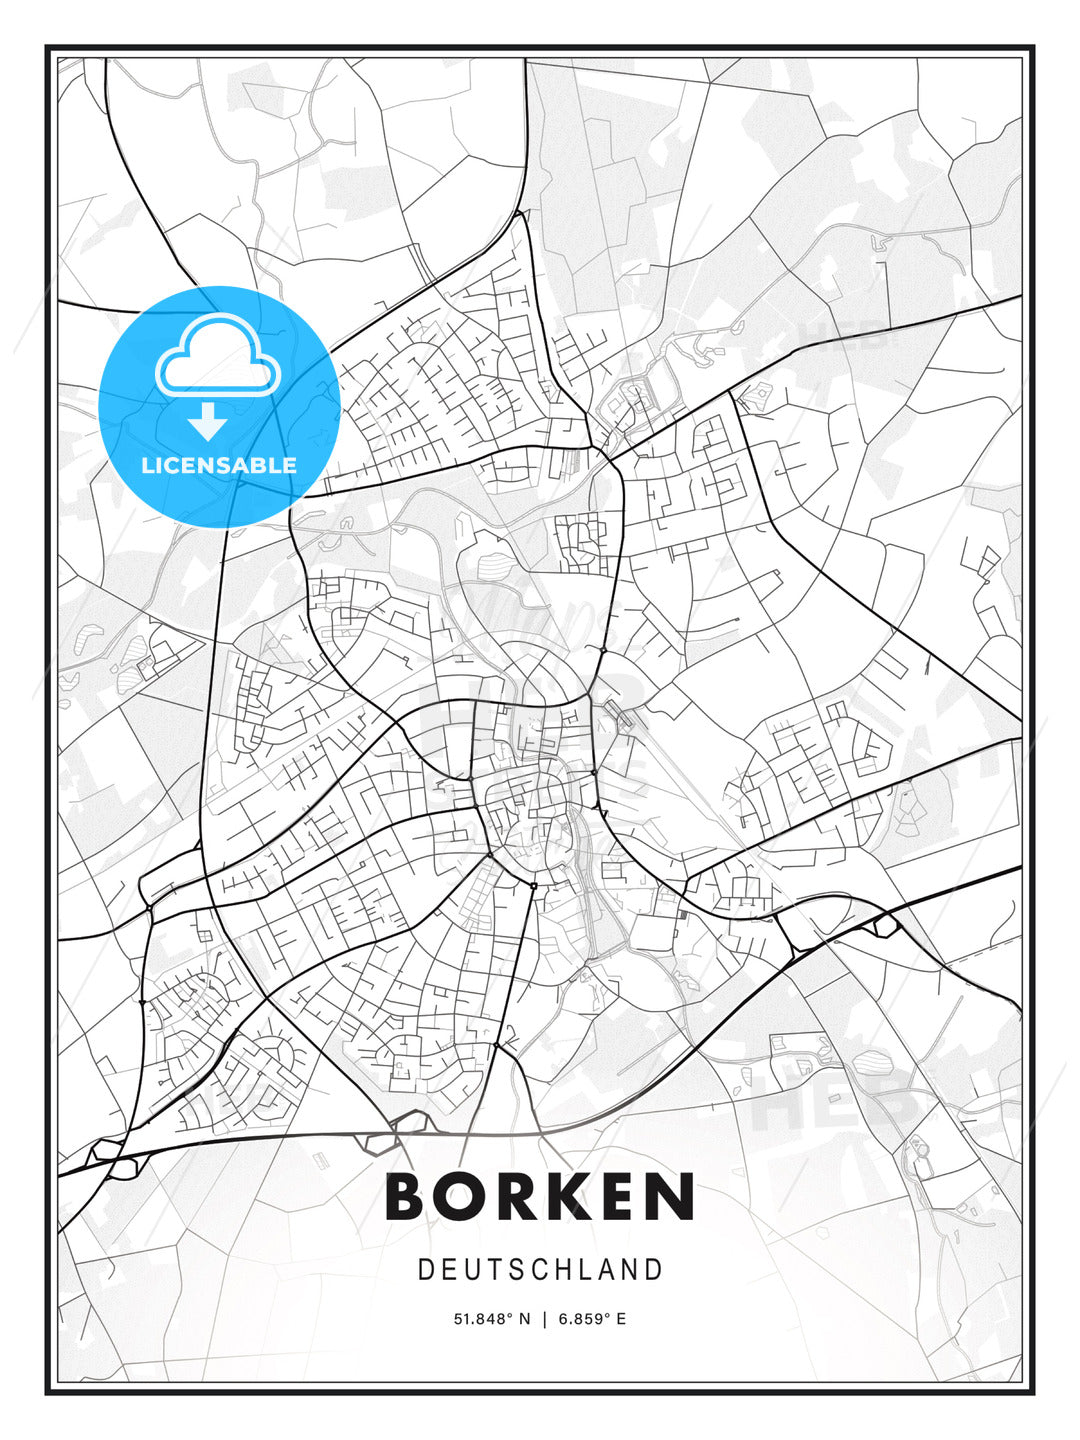 Borken, Germany, Modern Print Template in Various Formats - HEBSTREITS Sketches